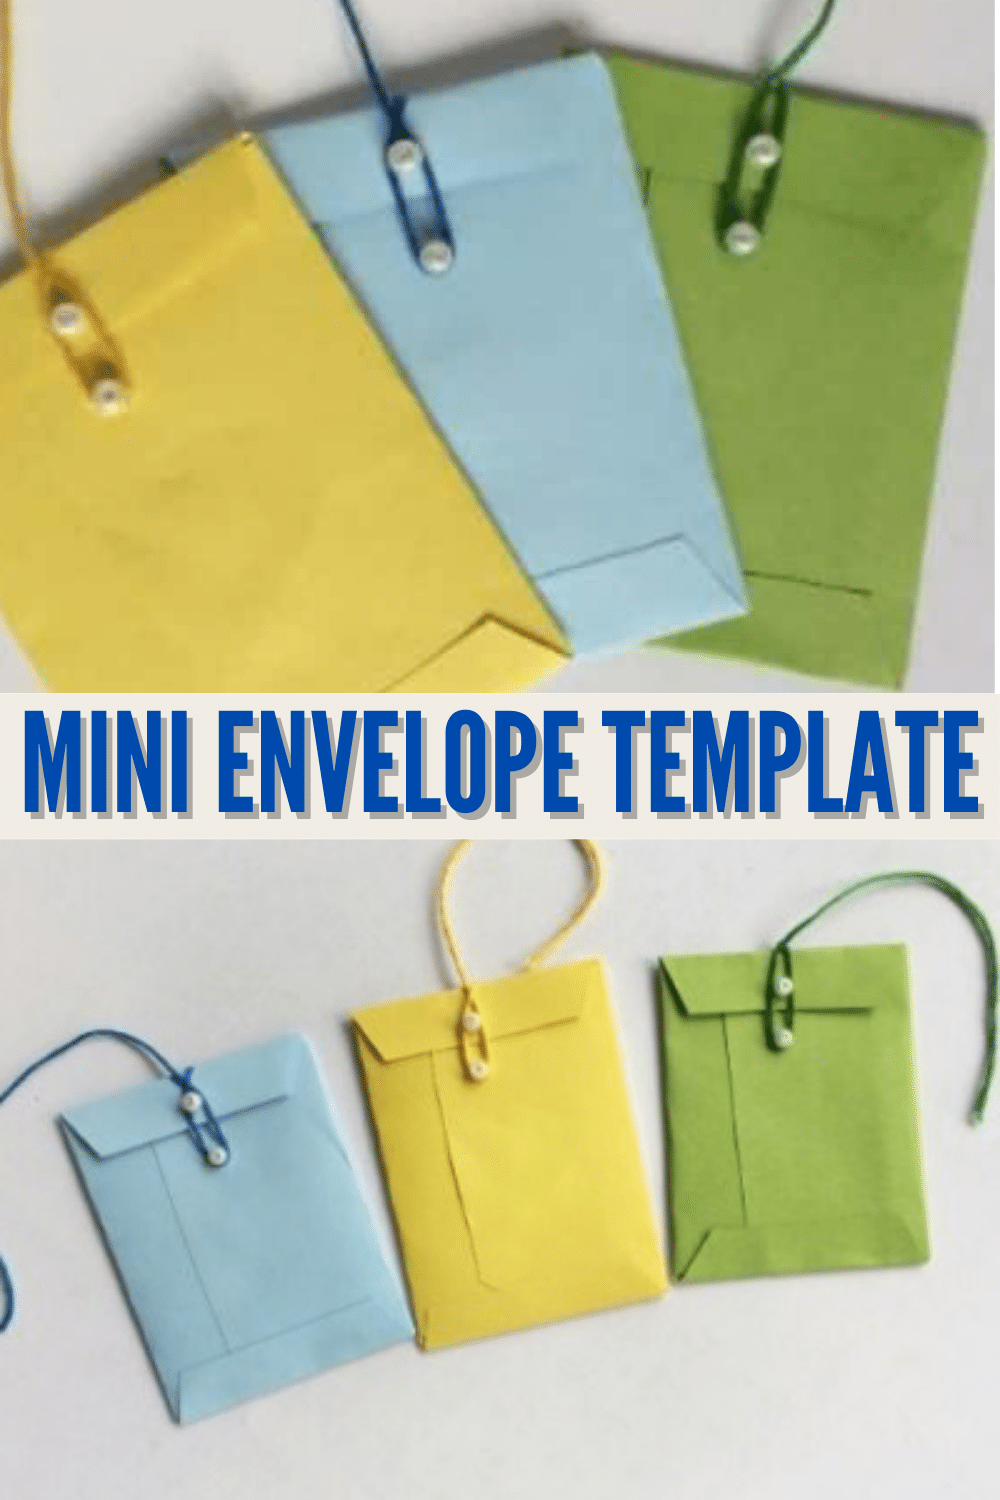 This mini envelope template will have you making adorable small envelopes in no time. These are easy to make and there are lots of ways to use them. #printables #templates #envelopes via @wondermomwannab